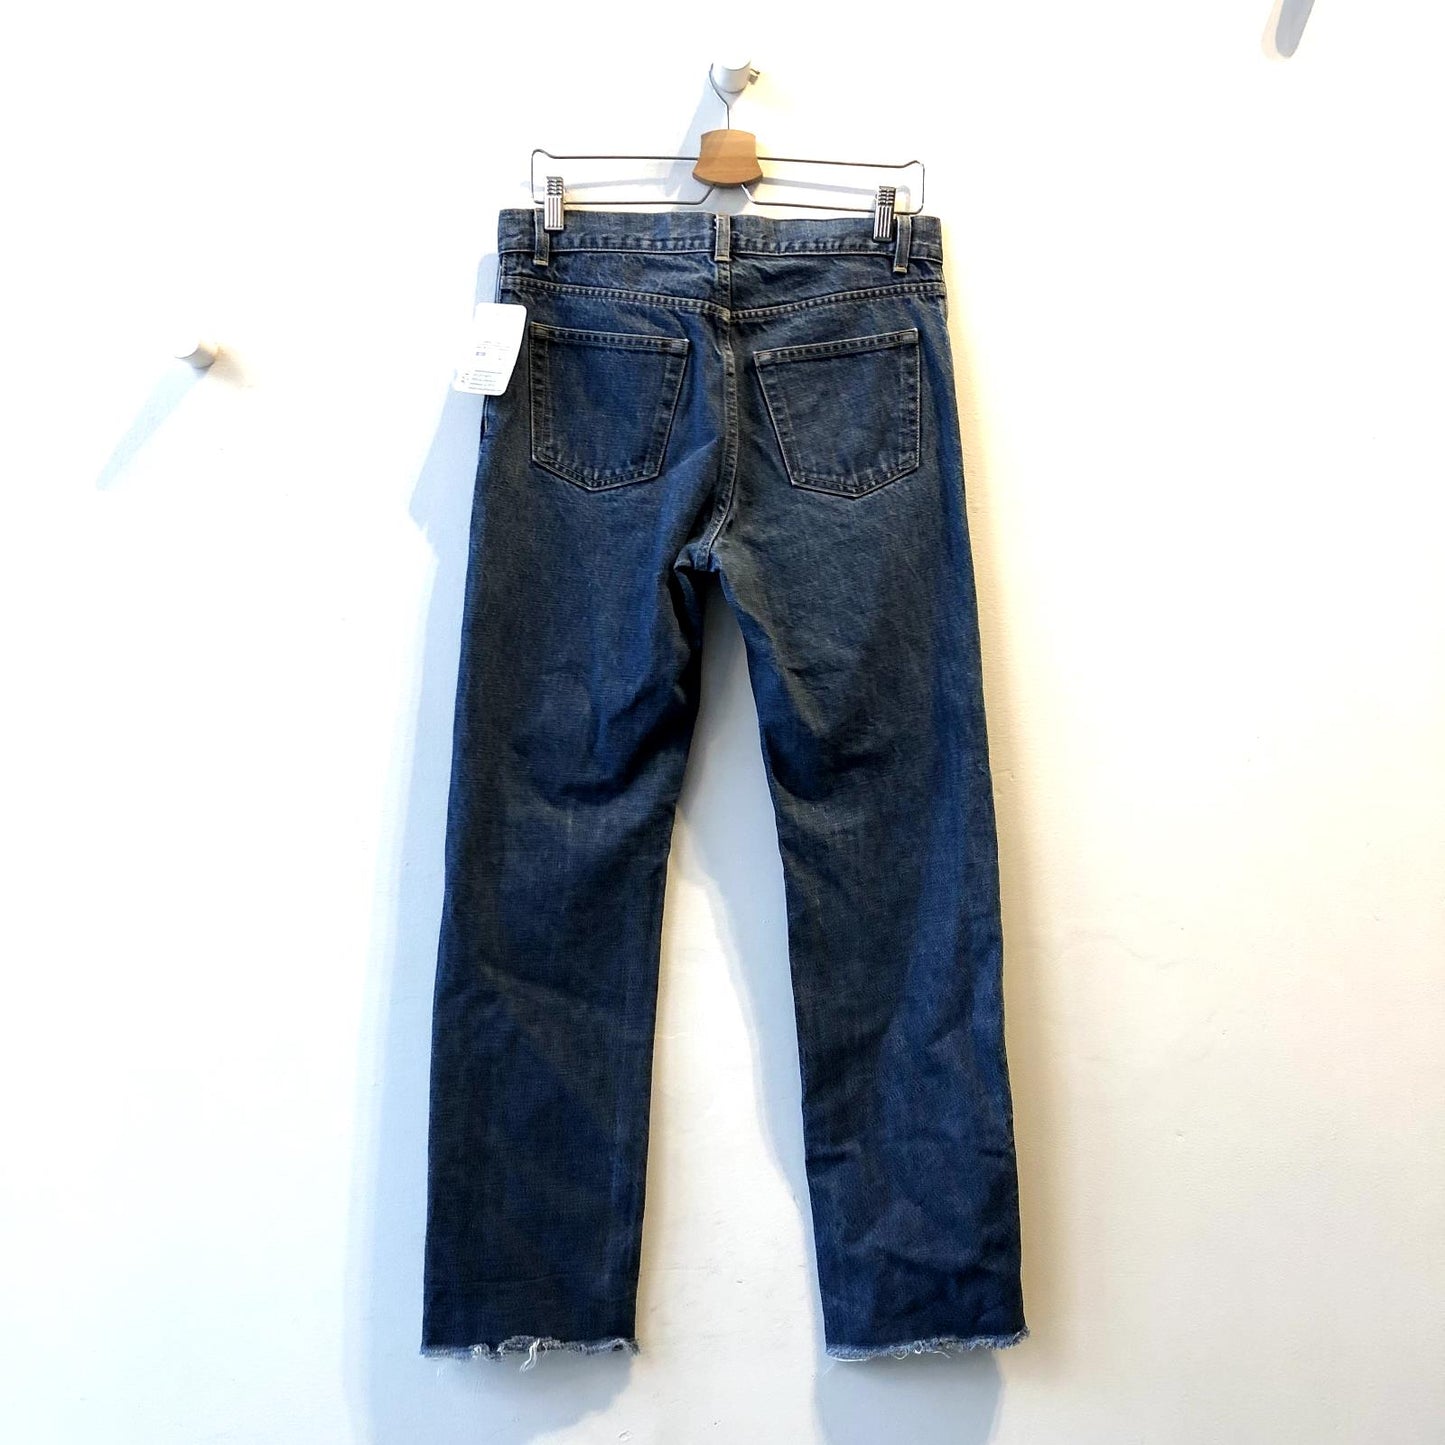 31 - Helmut Lang Archival Vintage Frayed Hem Button Fly Relaxed Fit Jeans 0721DK